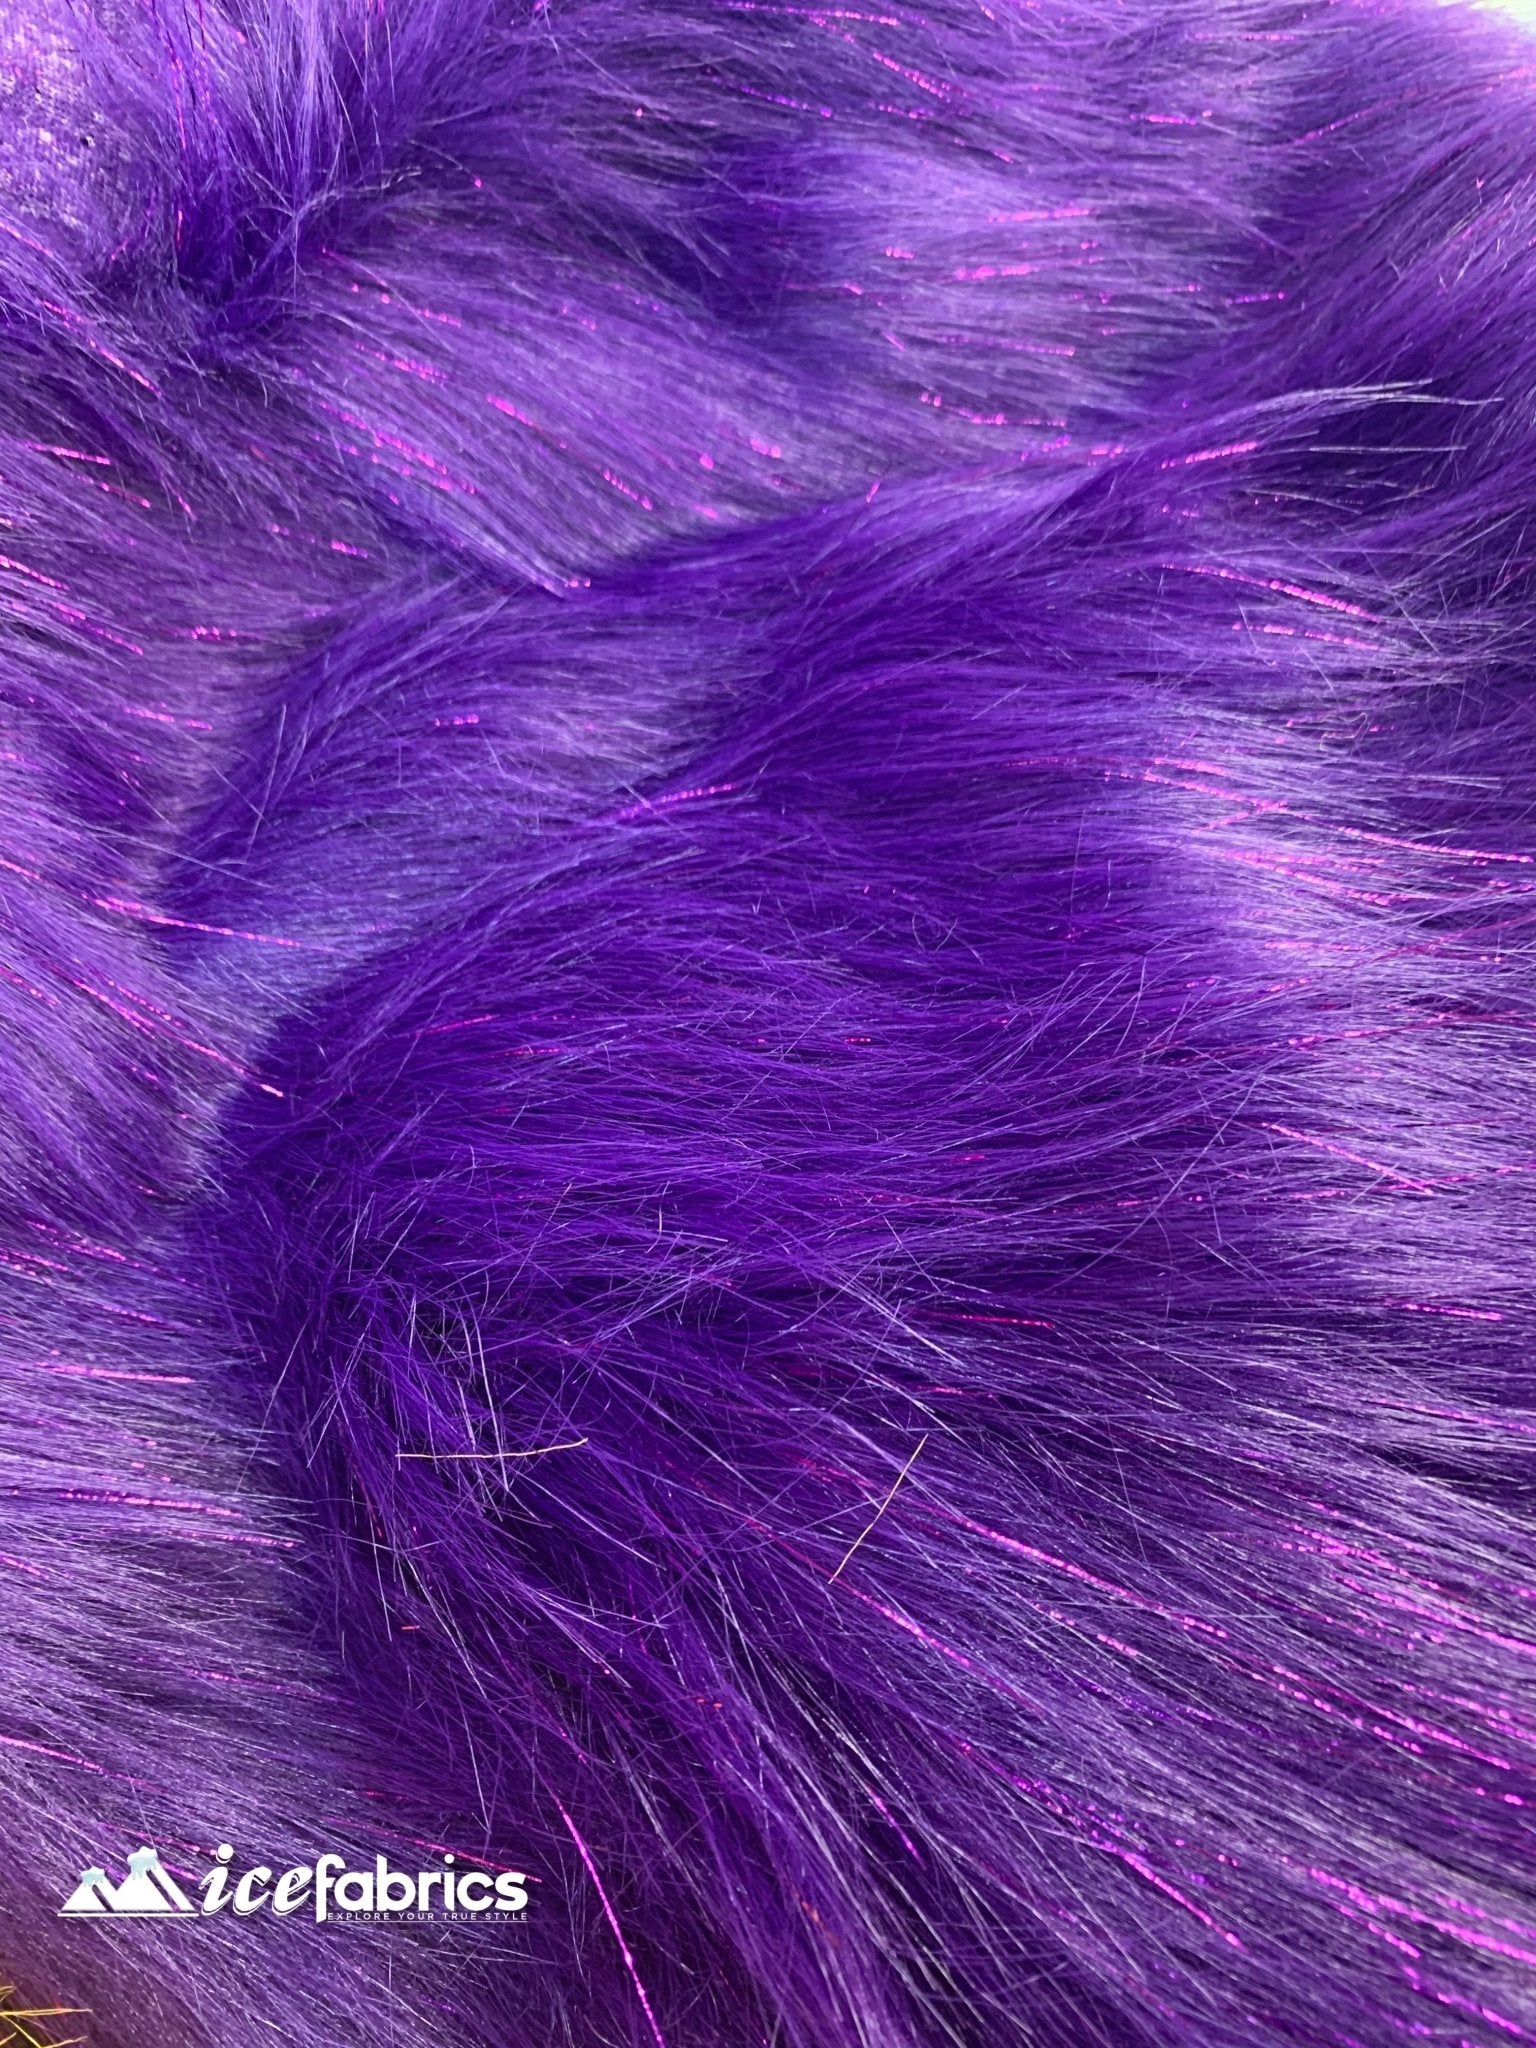 Tinsel Long Pile Mongolian Faux Fur Fabric By The Yard Fashion FabricICEFABRICICE FABRICSPurpleBy The Yard (60 inches Wide)Tinsel Long Pile Mongolian Faux Fur Fabric By The Yard Fashion Fabric ICEFABRIC